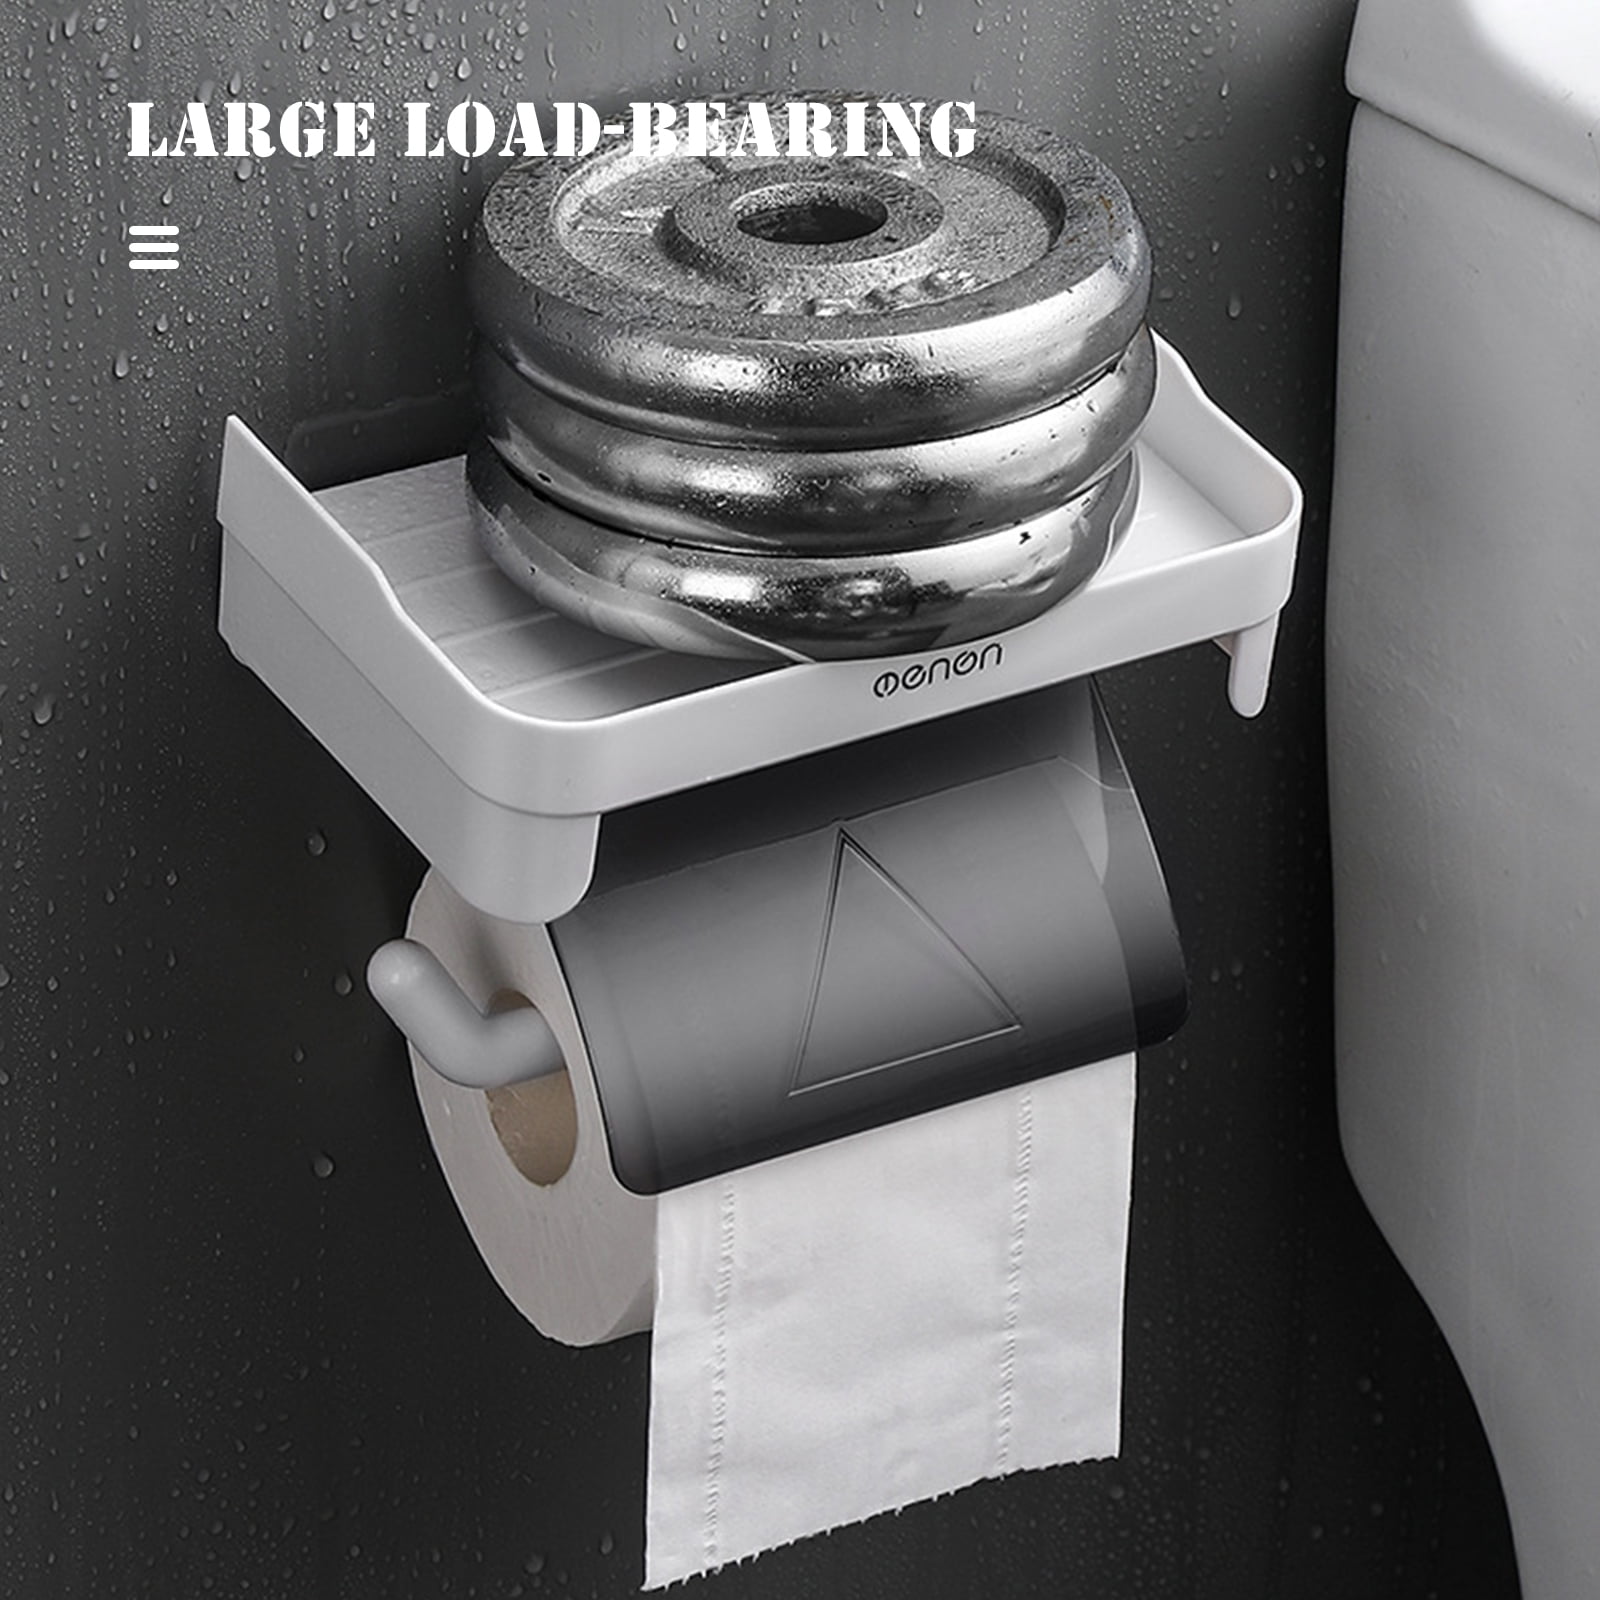 Stainless Steel Paper Towel Holder Adhesive Toilet Roll Paper Holder No  Hole Punch Kitchen Bathroom Toilet Lengthen Storage Rack